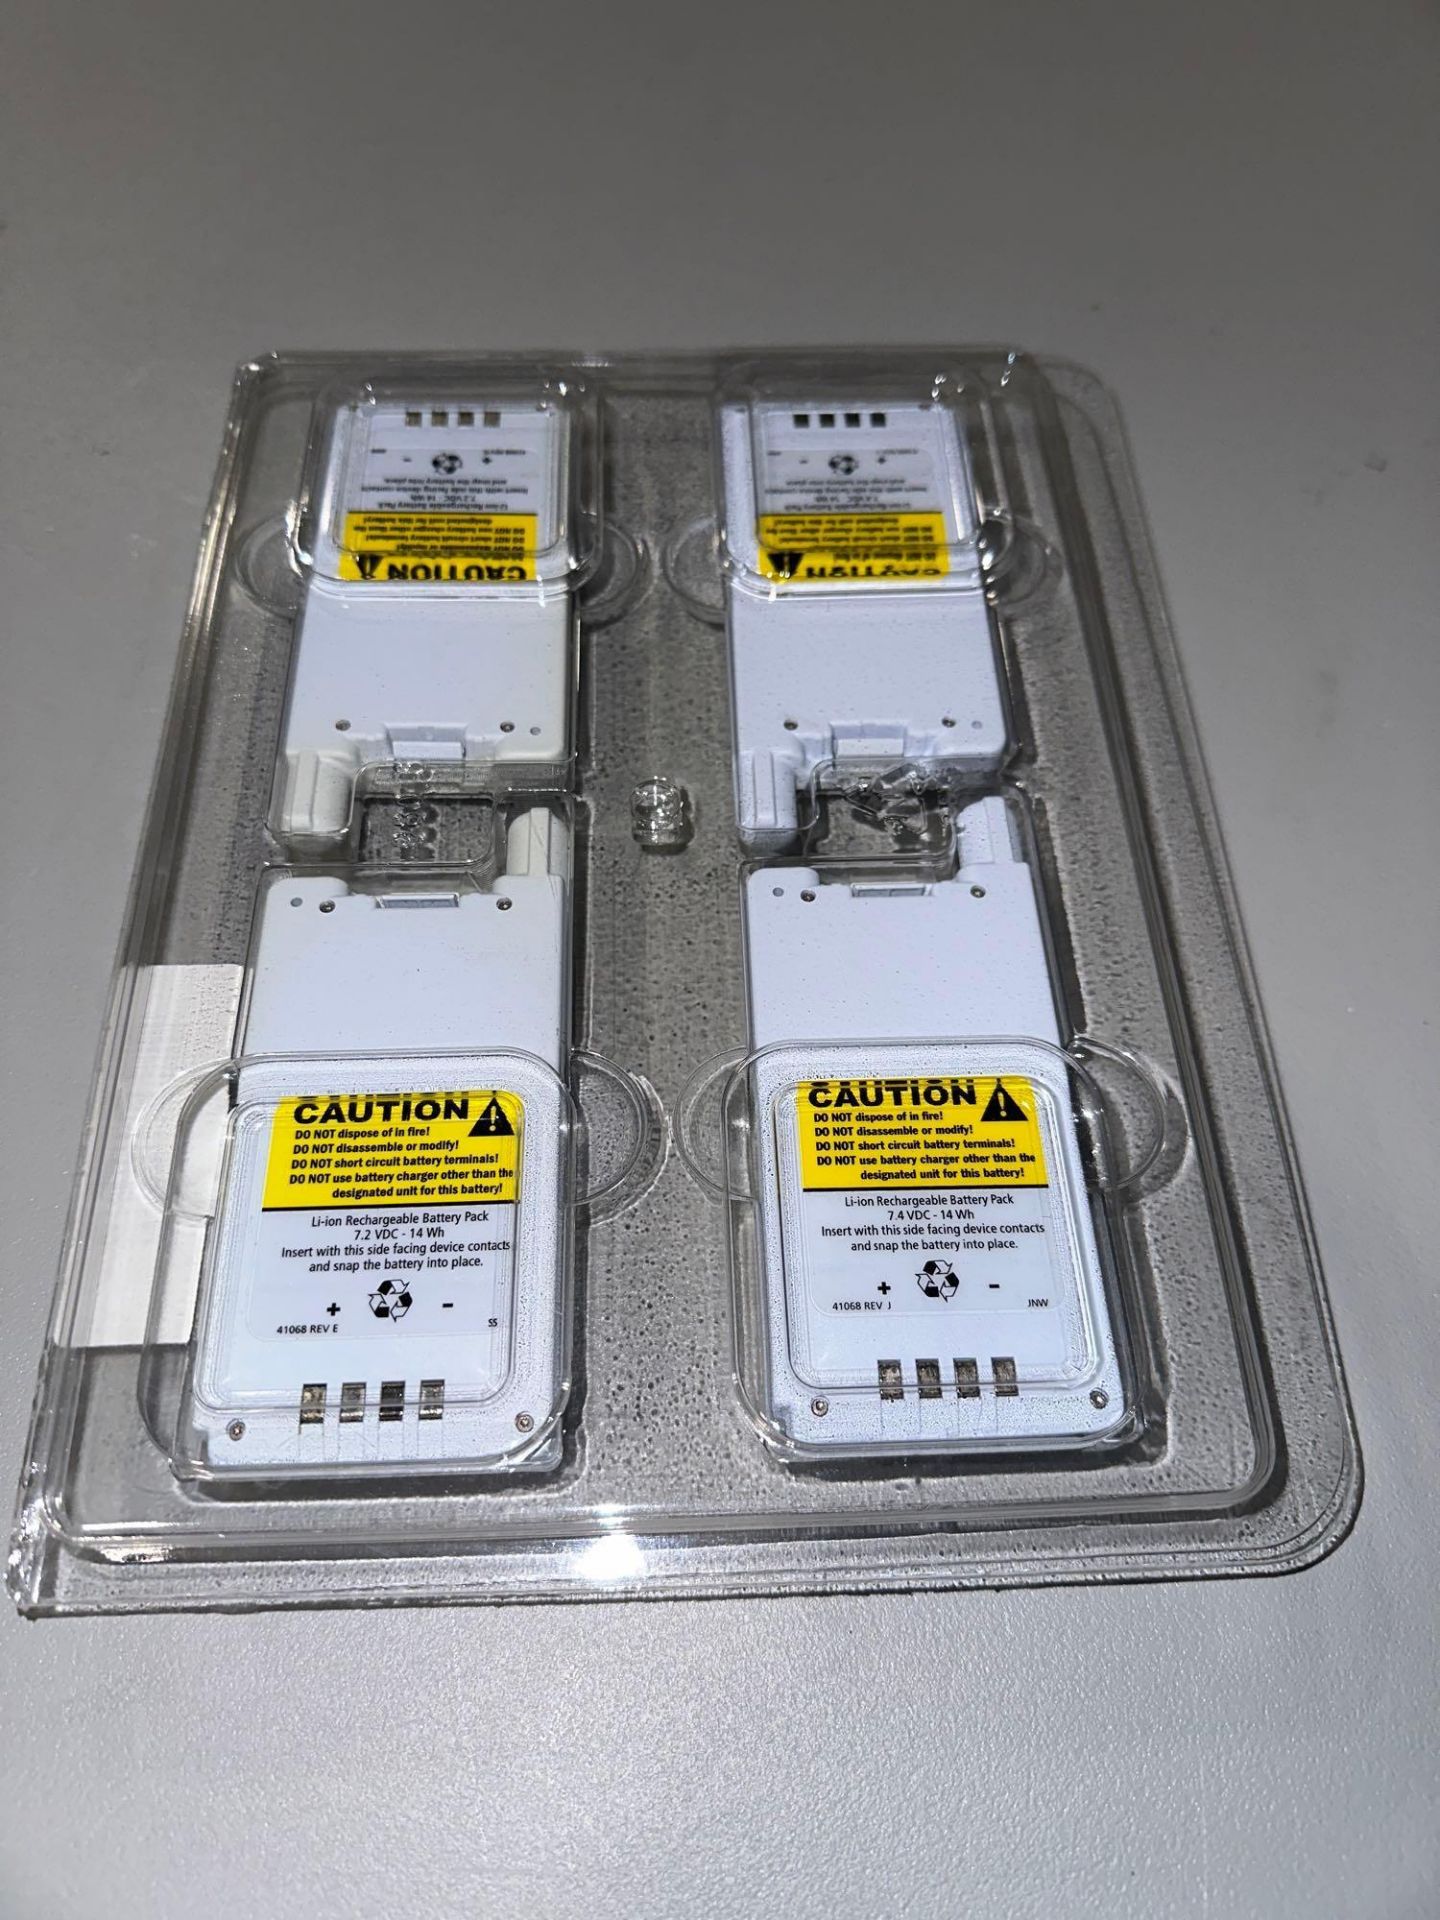 LOT OF BAXTER SIGMA SPECTRUM INFUSION PUMP BATTERIES - Image 2 of 2